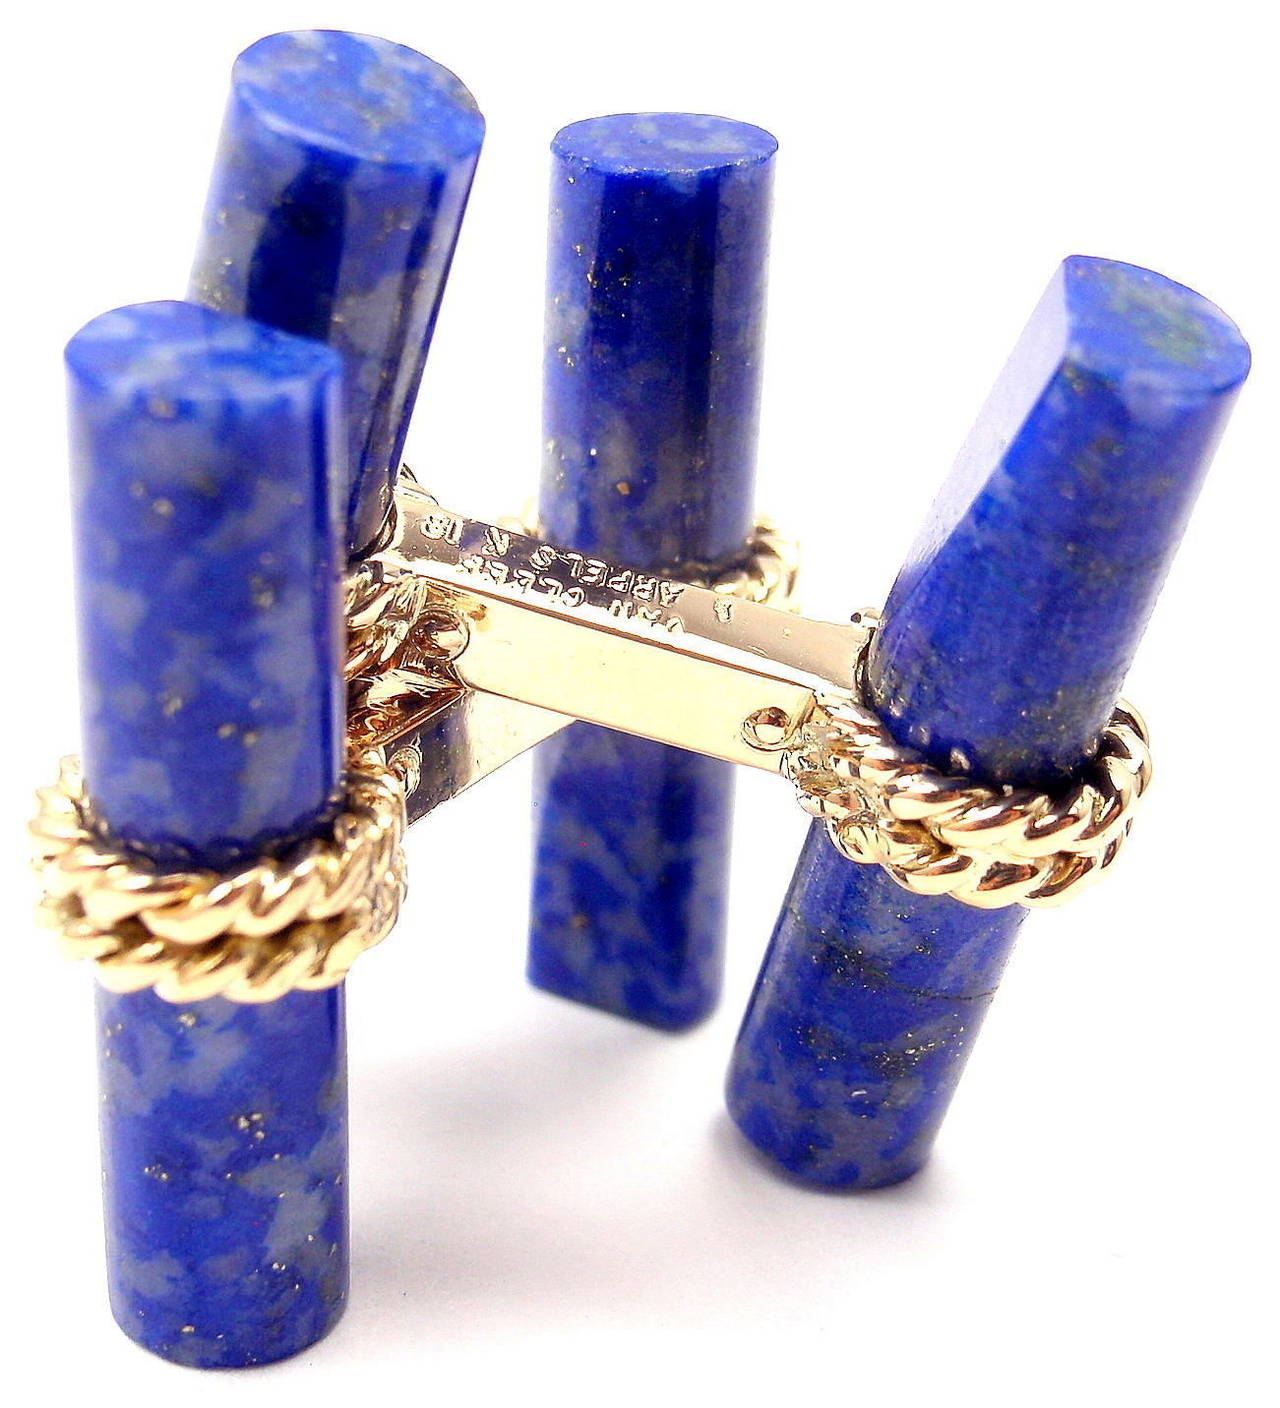 18k Yellow Gold Lapis Lazuli Cufflinks by Van Cleef & Arpels Paris.

Details:
Measurements: 22mm x 8mm
Weight: 9.6 grams
Stamped Hallmarks: Van Cleef & Arpels 18k C9037 L8
*Free Shipping within the United States*

YOUR PRICE: